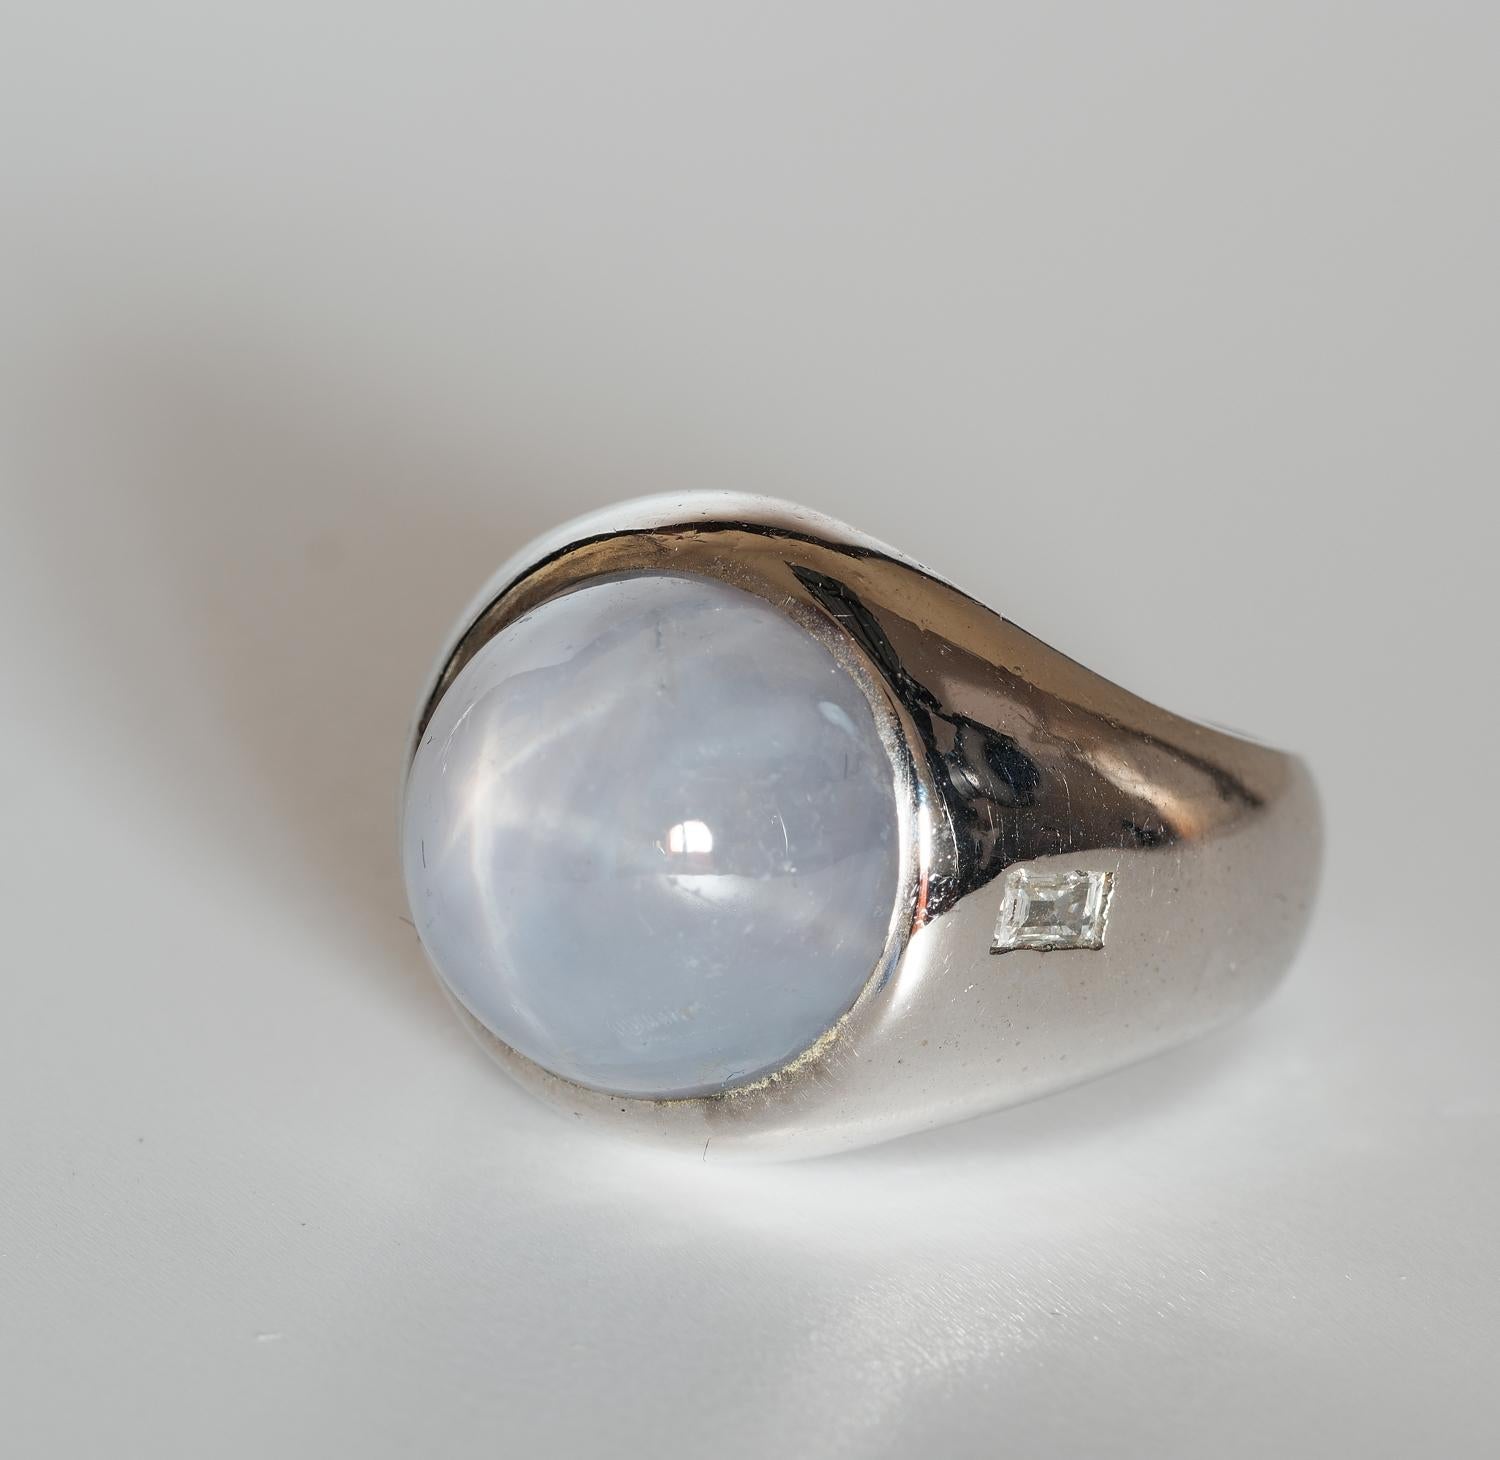 This beautiful estate Gent ring is 1945/50 ca.
Individually hand crafted of solid 18 KT white gold, marked
Traditional design suitable for either sex, displaying a beautiful polished plain mount with two sides square Diamonds flanking the large